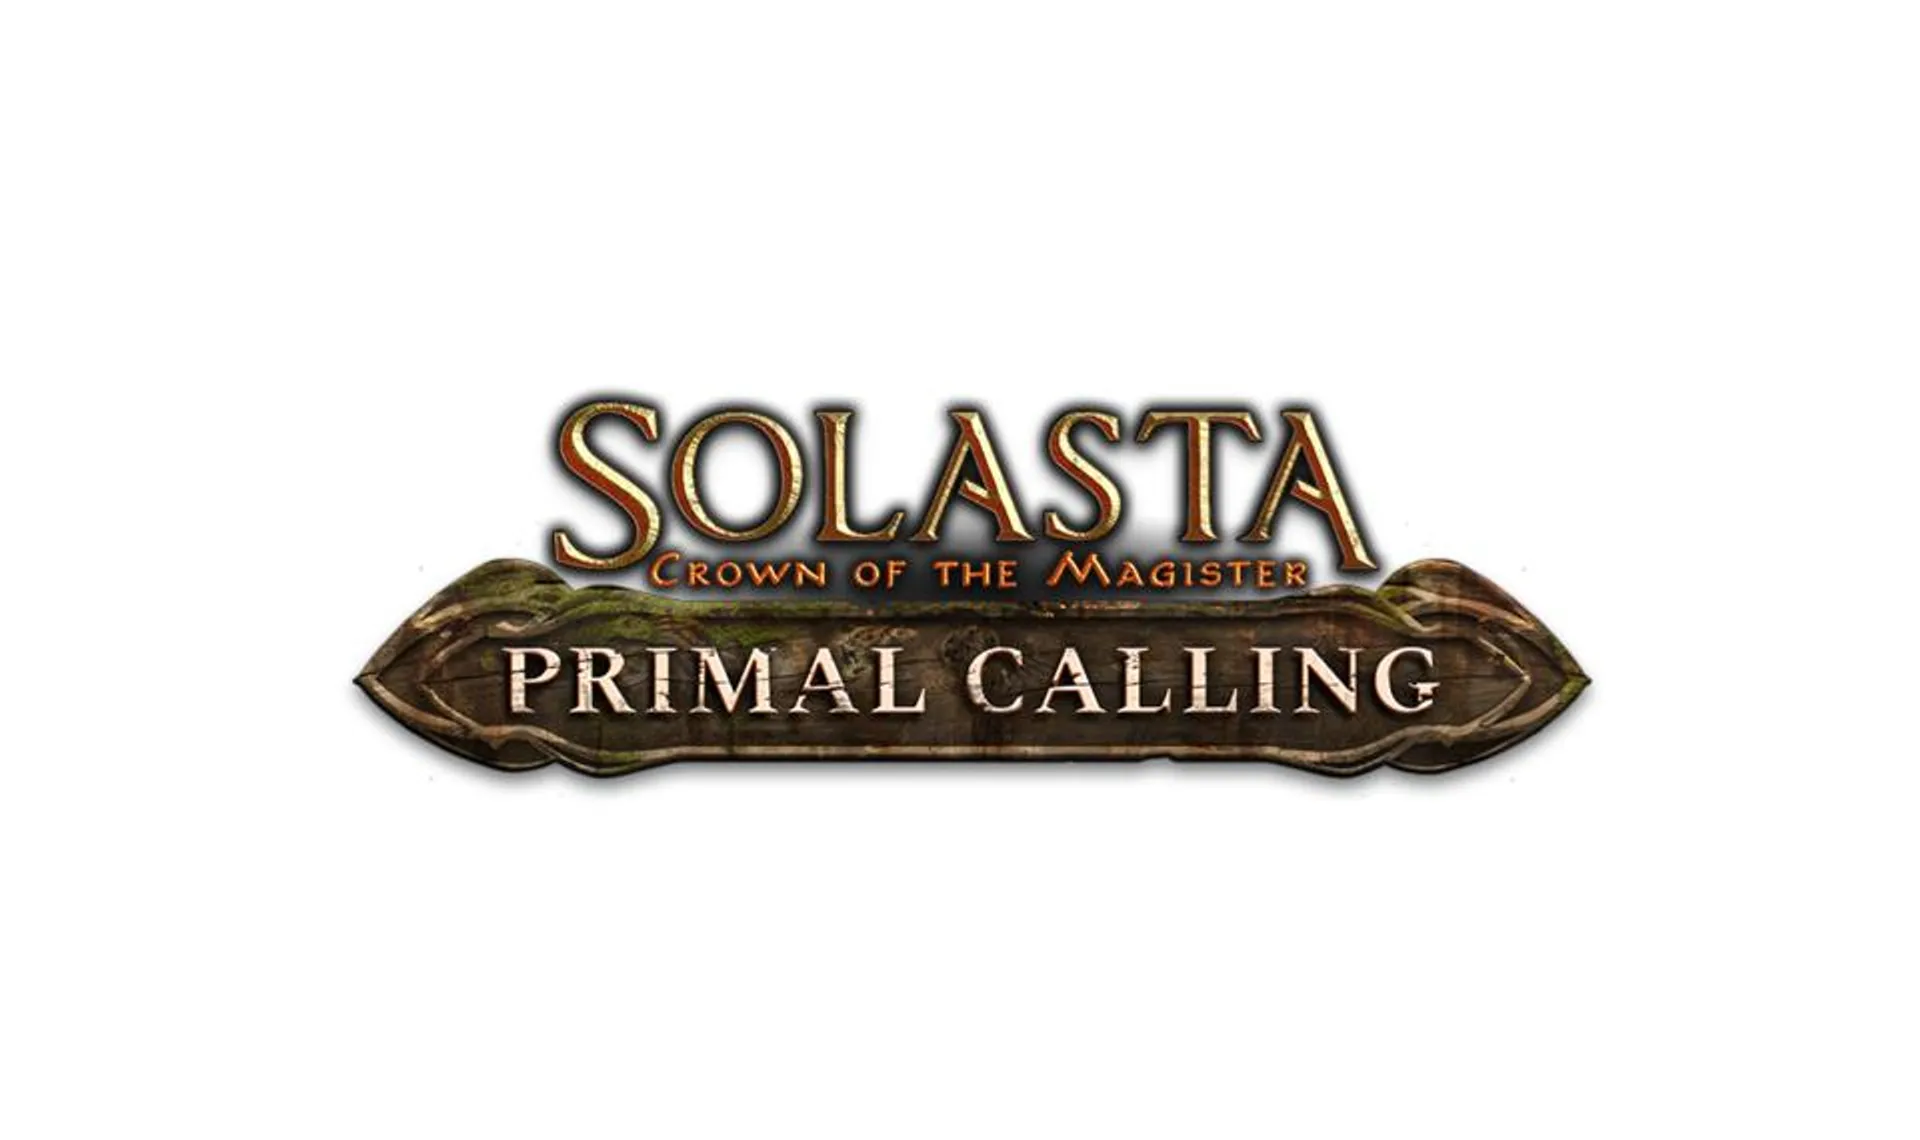 Solasta: Crown of the Magister Primal Calling